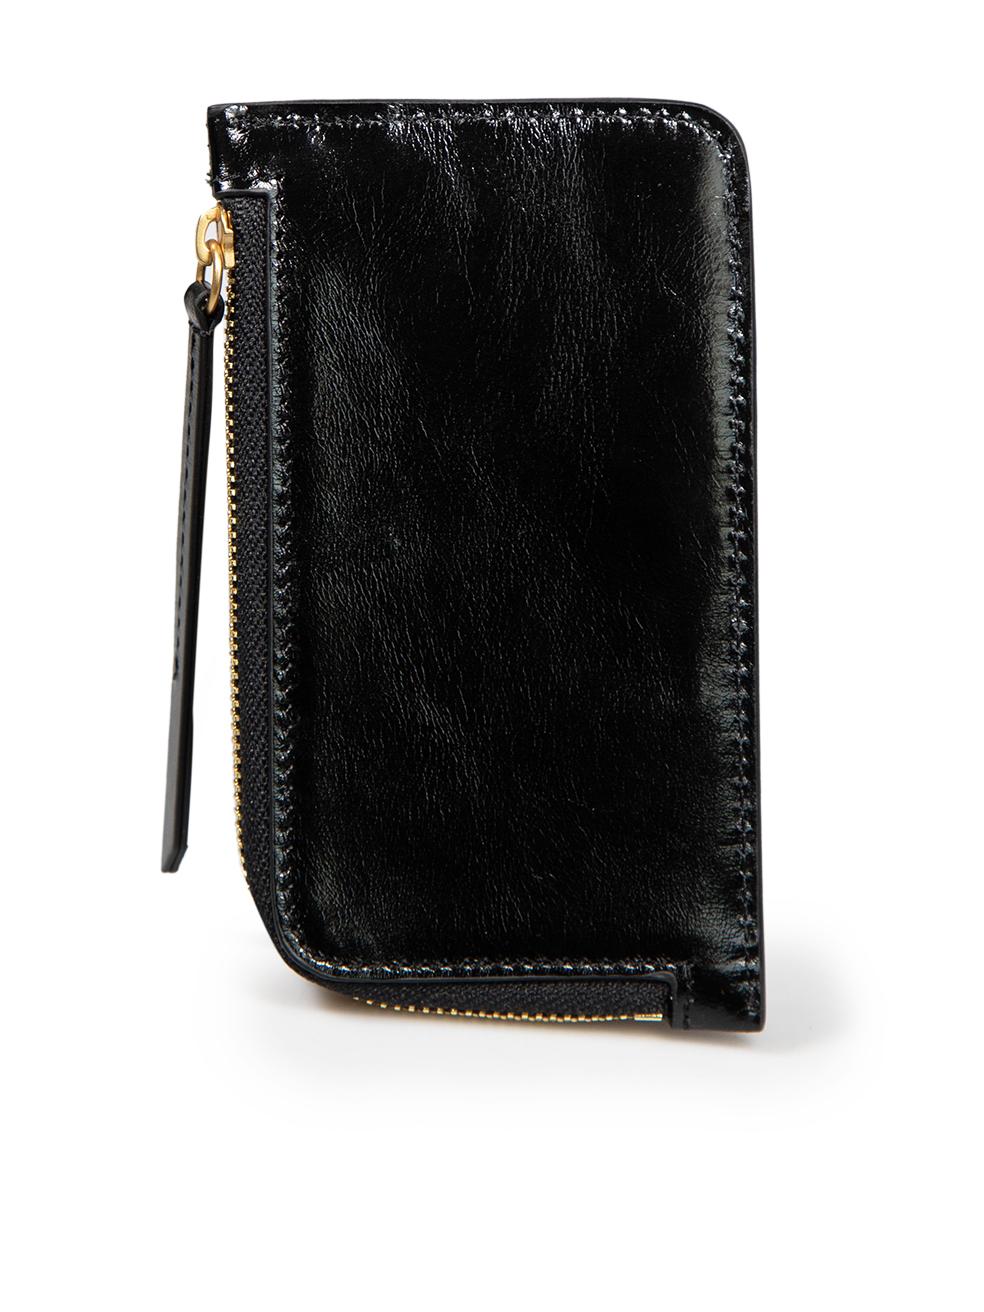 Isabel Marant Black Leather Kochi Card Holder In Excellent Condition For Sale In London, GB